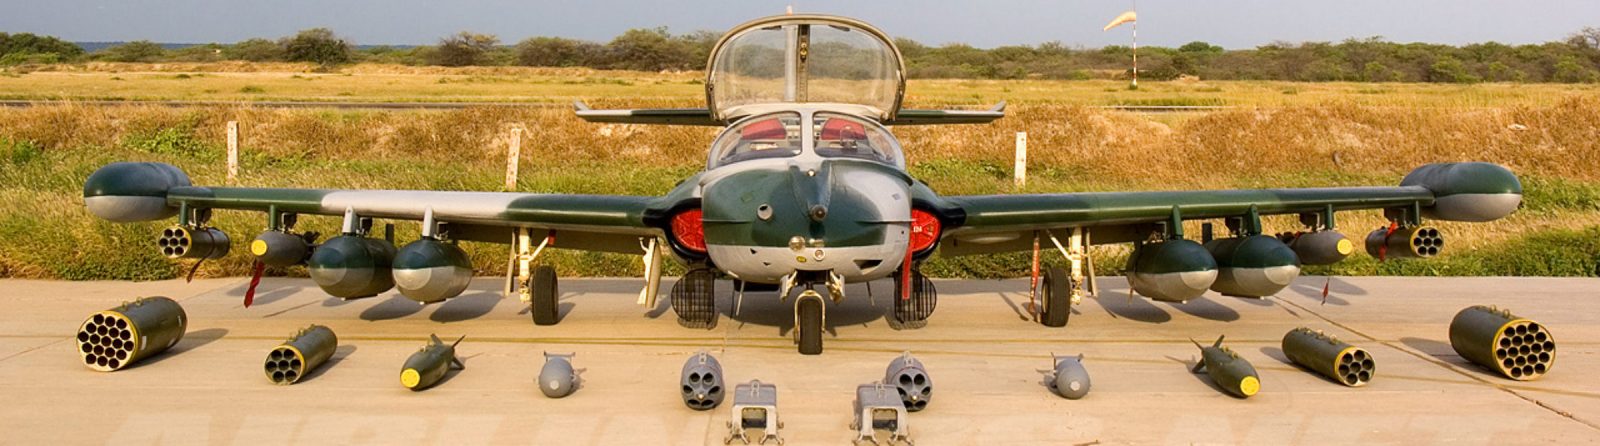 Amazing facts about the Cessna A-37 Dragonfly